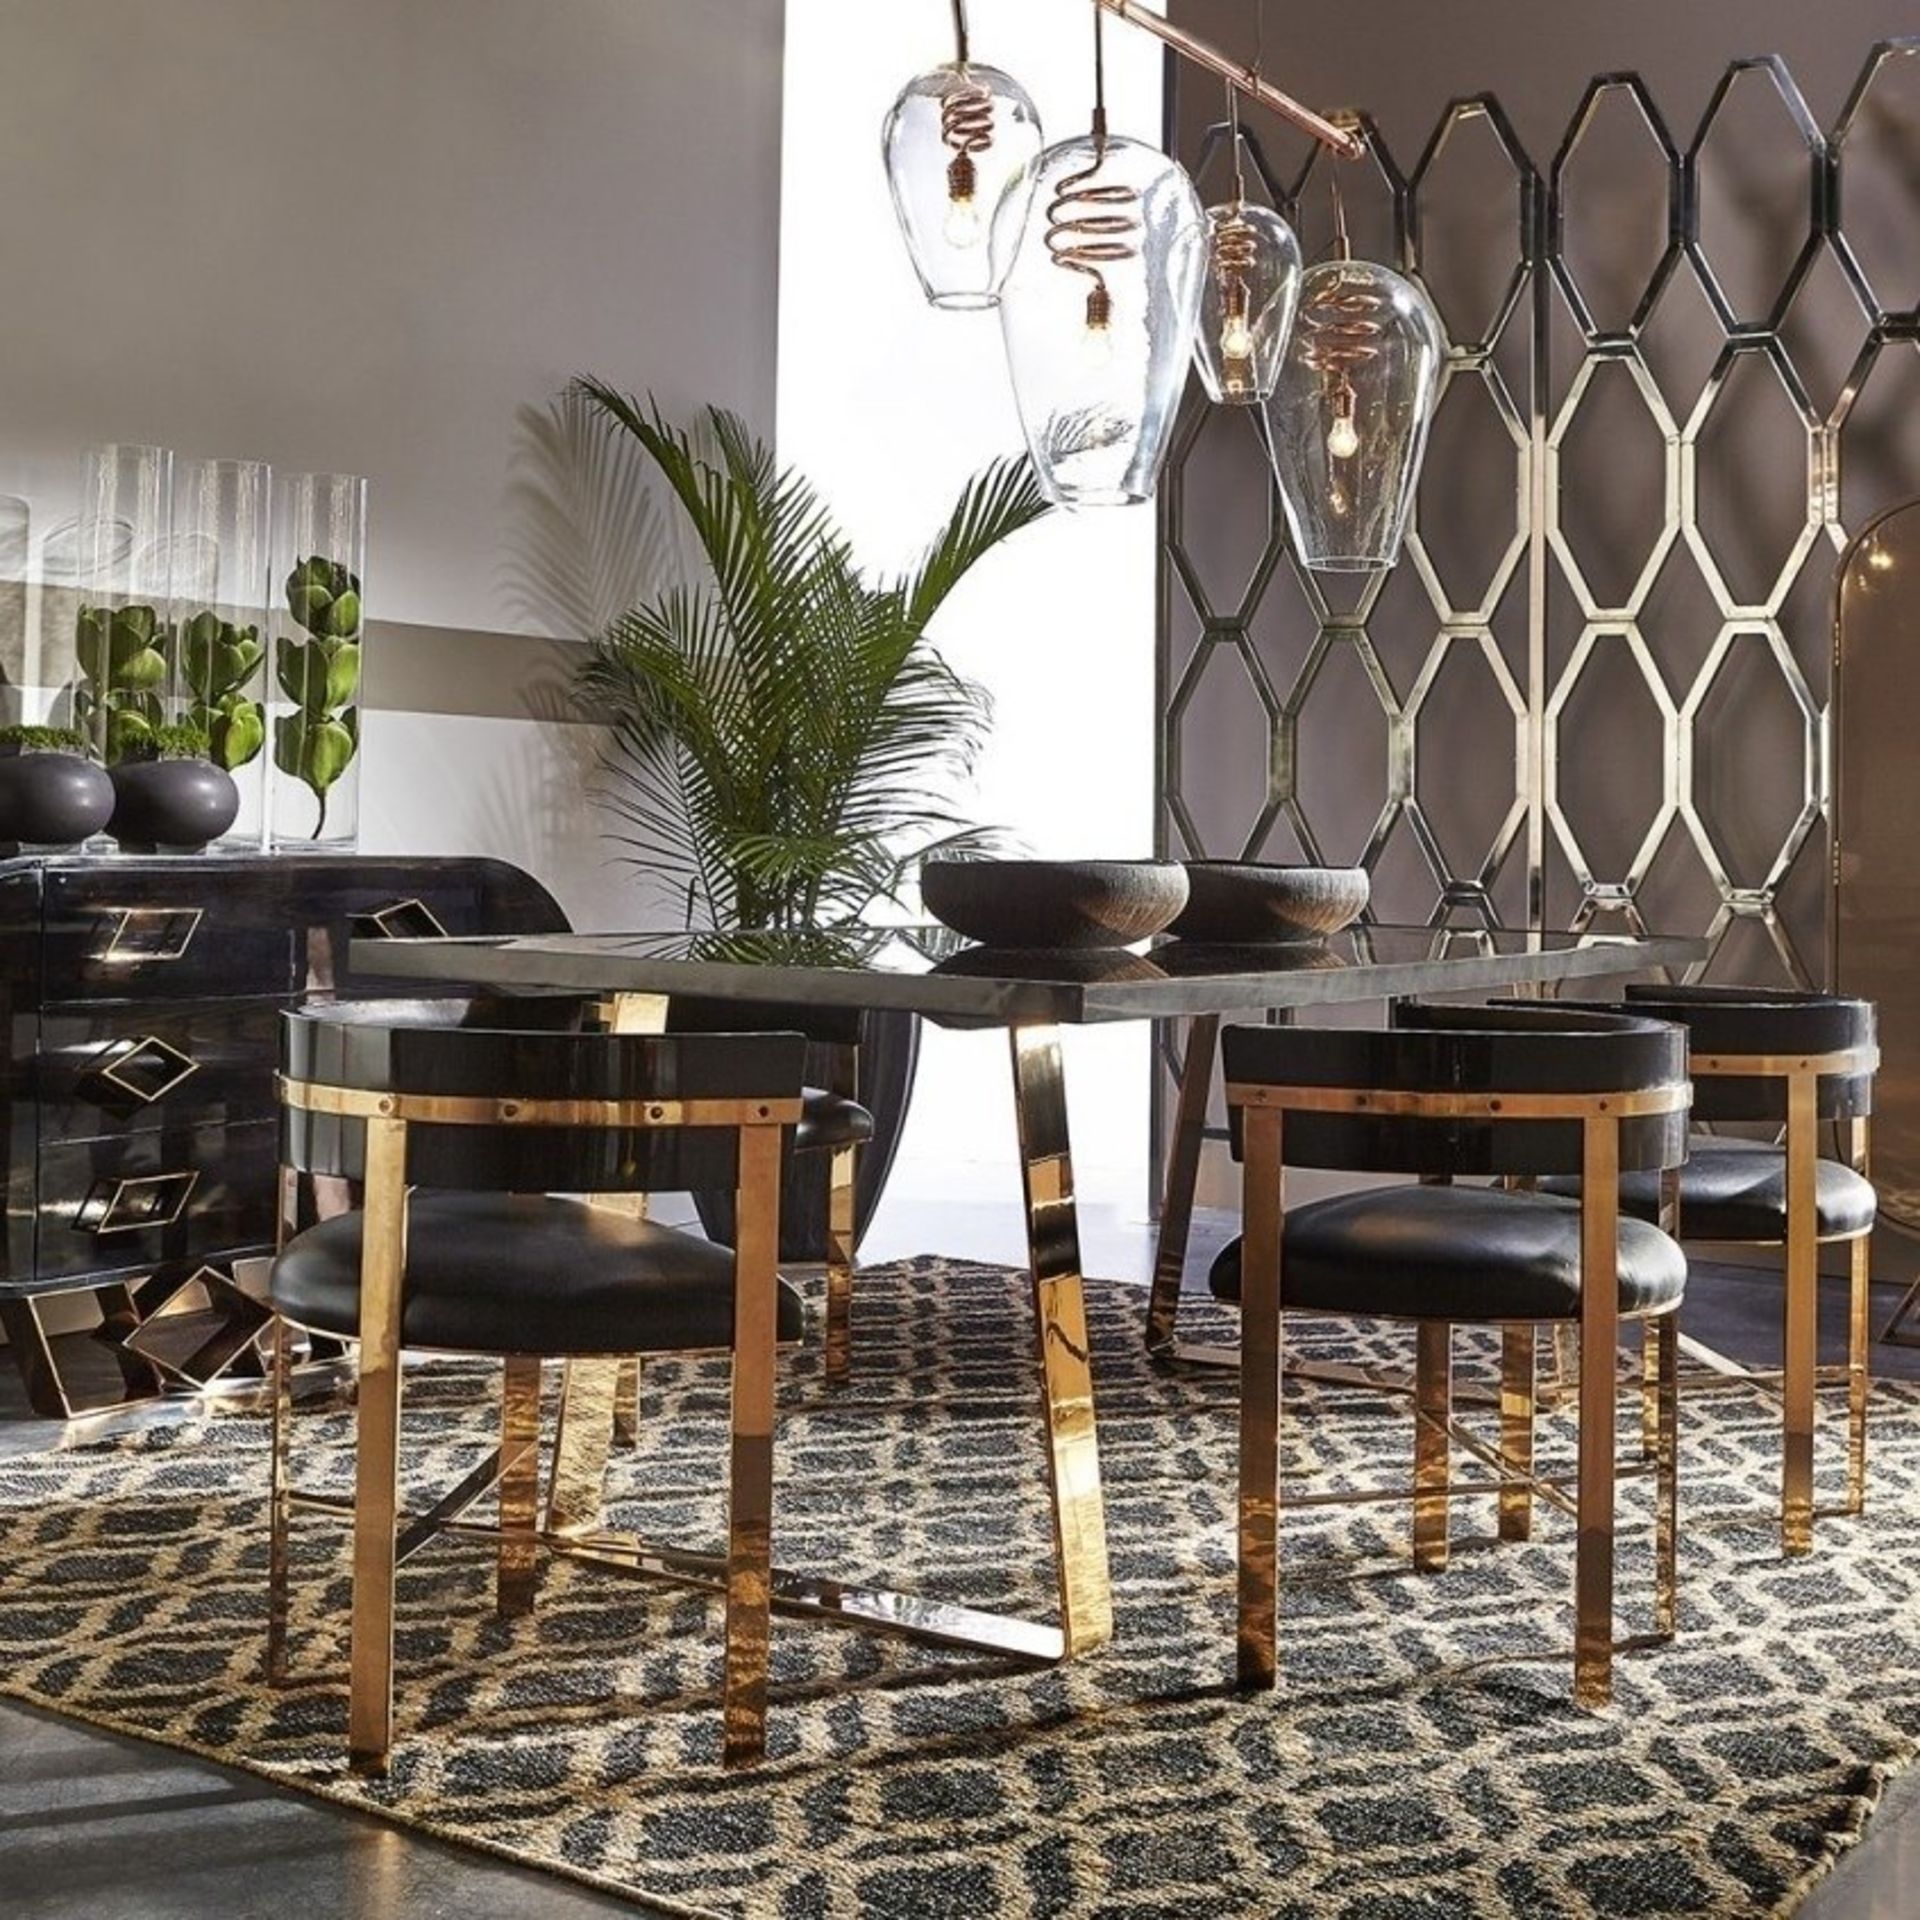 Art Dining Chair - Mirrored Brass / Black Onyx Leather The Art Dining Chair Incorporates Aspects